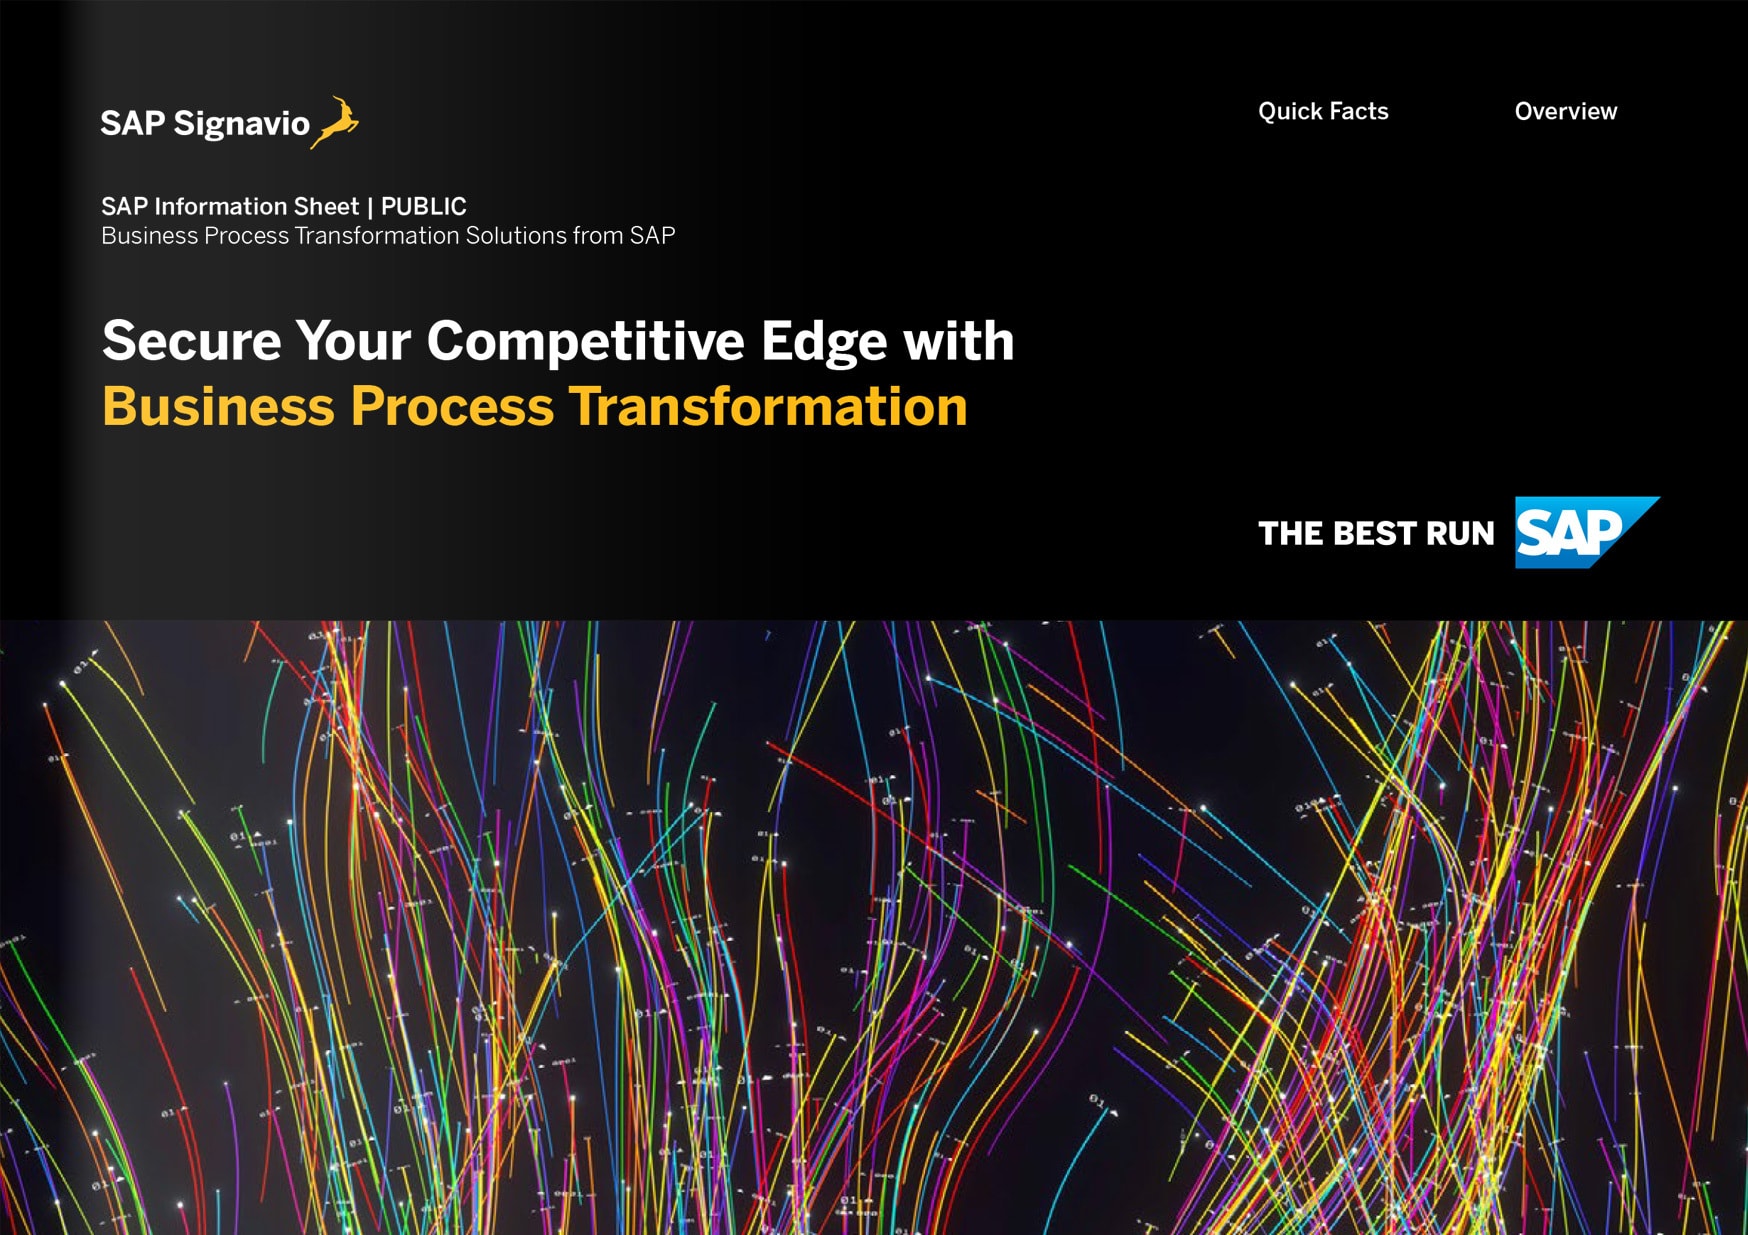 Secure Your Competitive Edge with Business Process Transformation